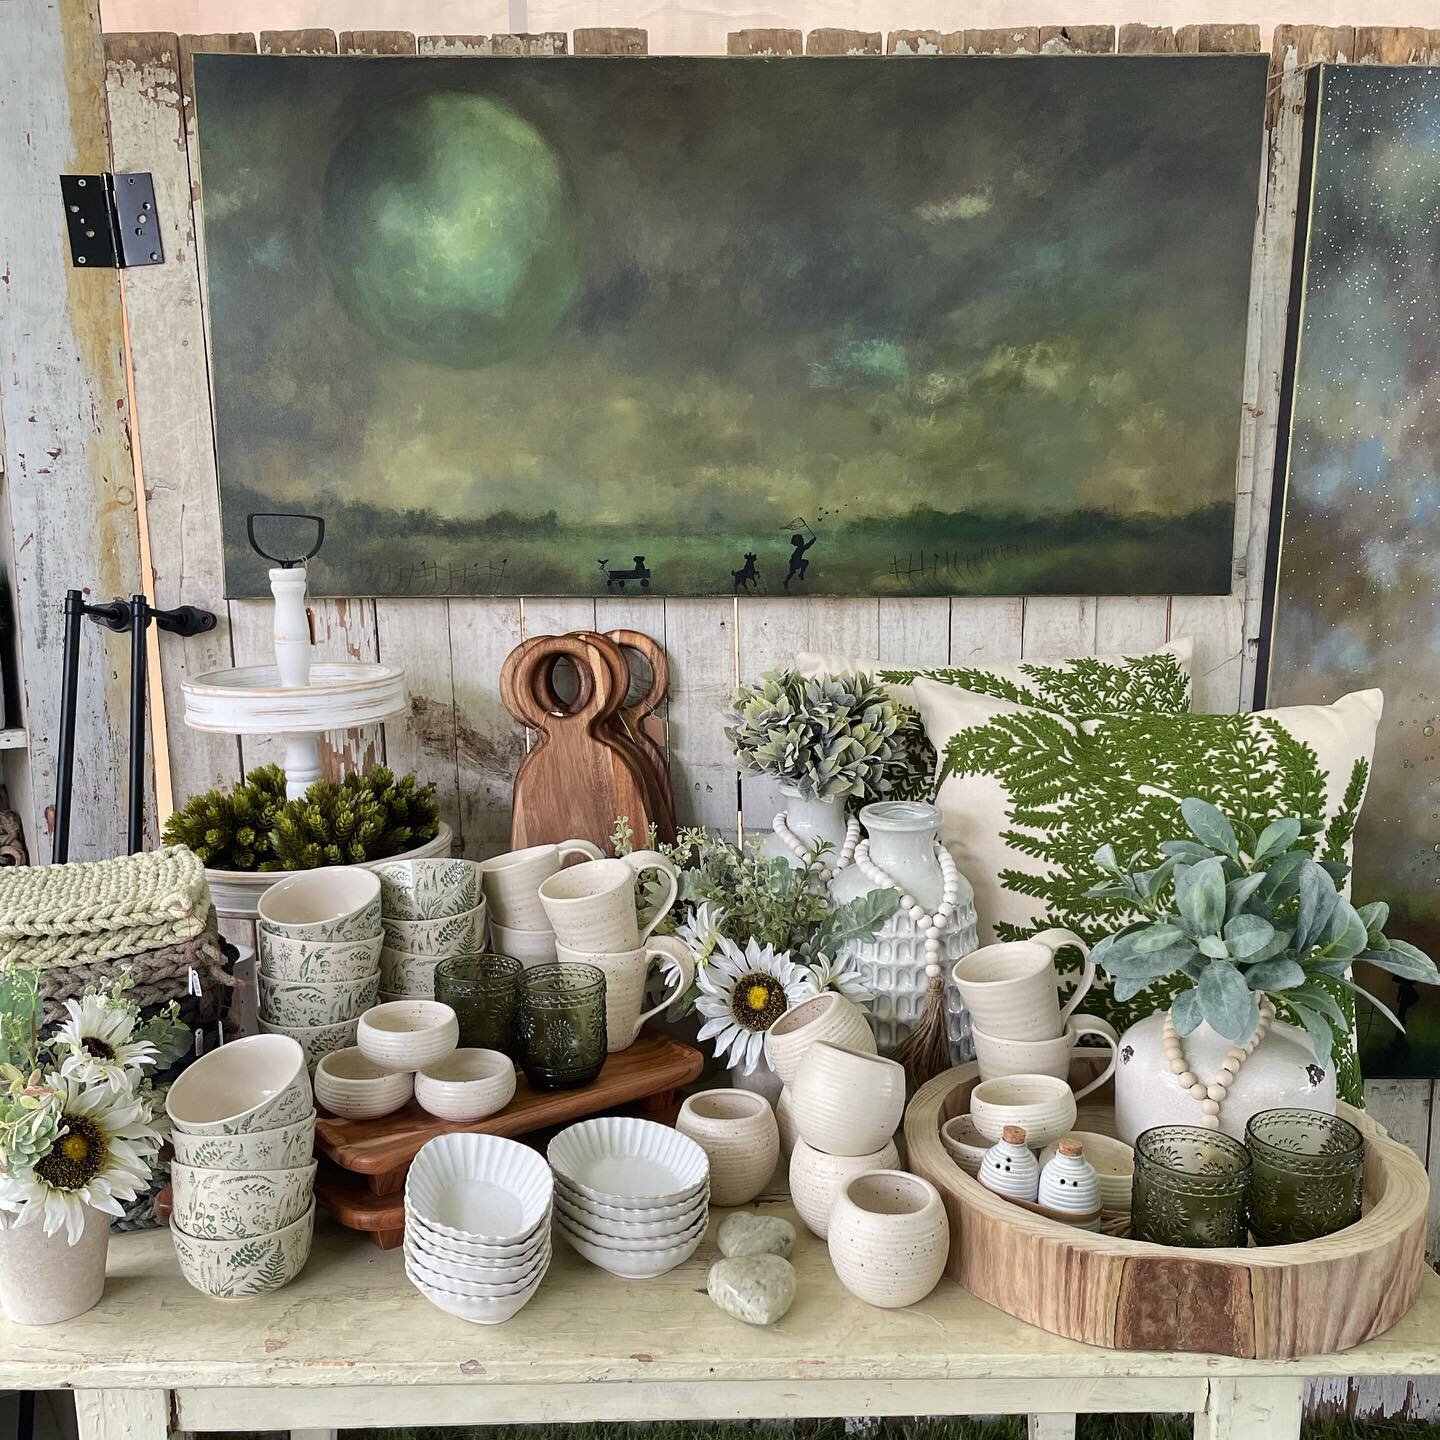 We made it back home friends!!✨ Thank you so much to everyone who came out this weekend to visit @theprofoundmarket we hope to see you again in the fall ❤️ #bluebirdhomedecor #shopsmall #homedecor #farmhousedecor #farmhousestyle #moonscape #moonpaint